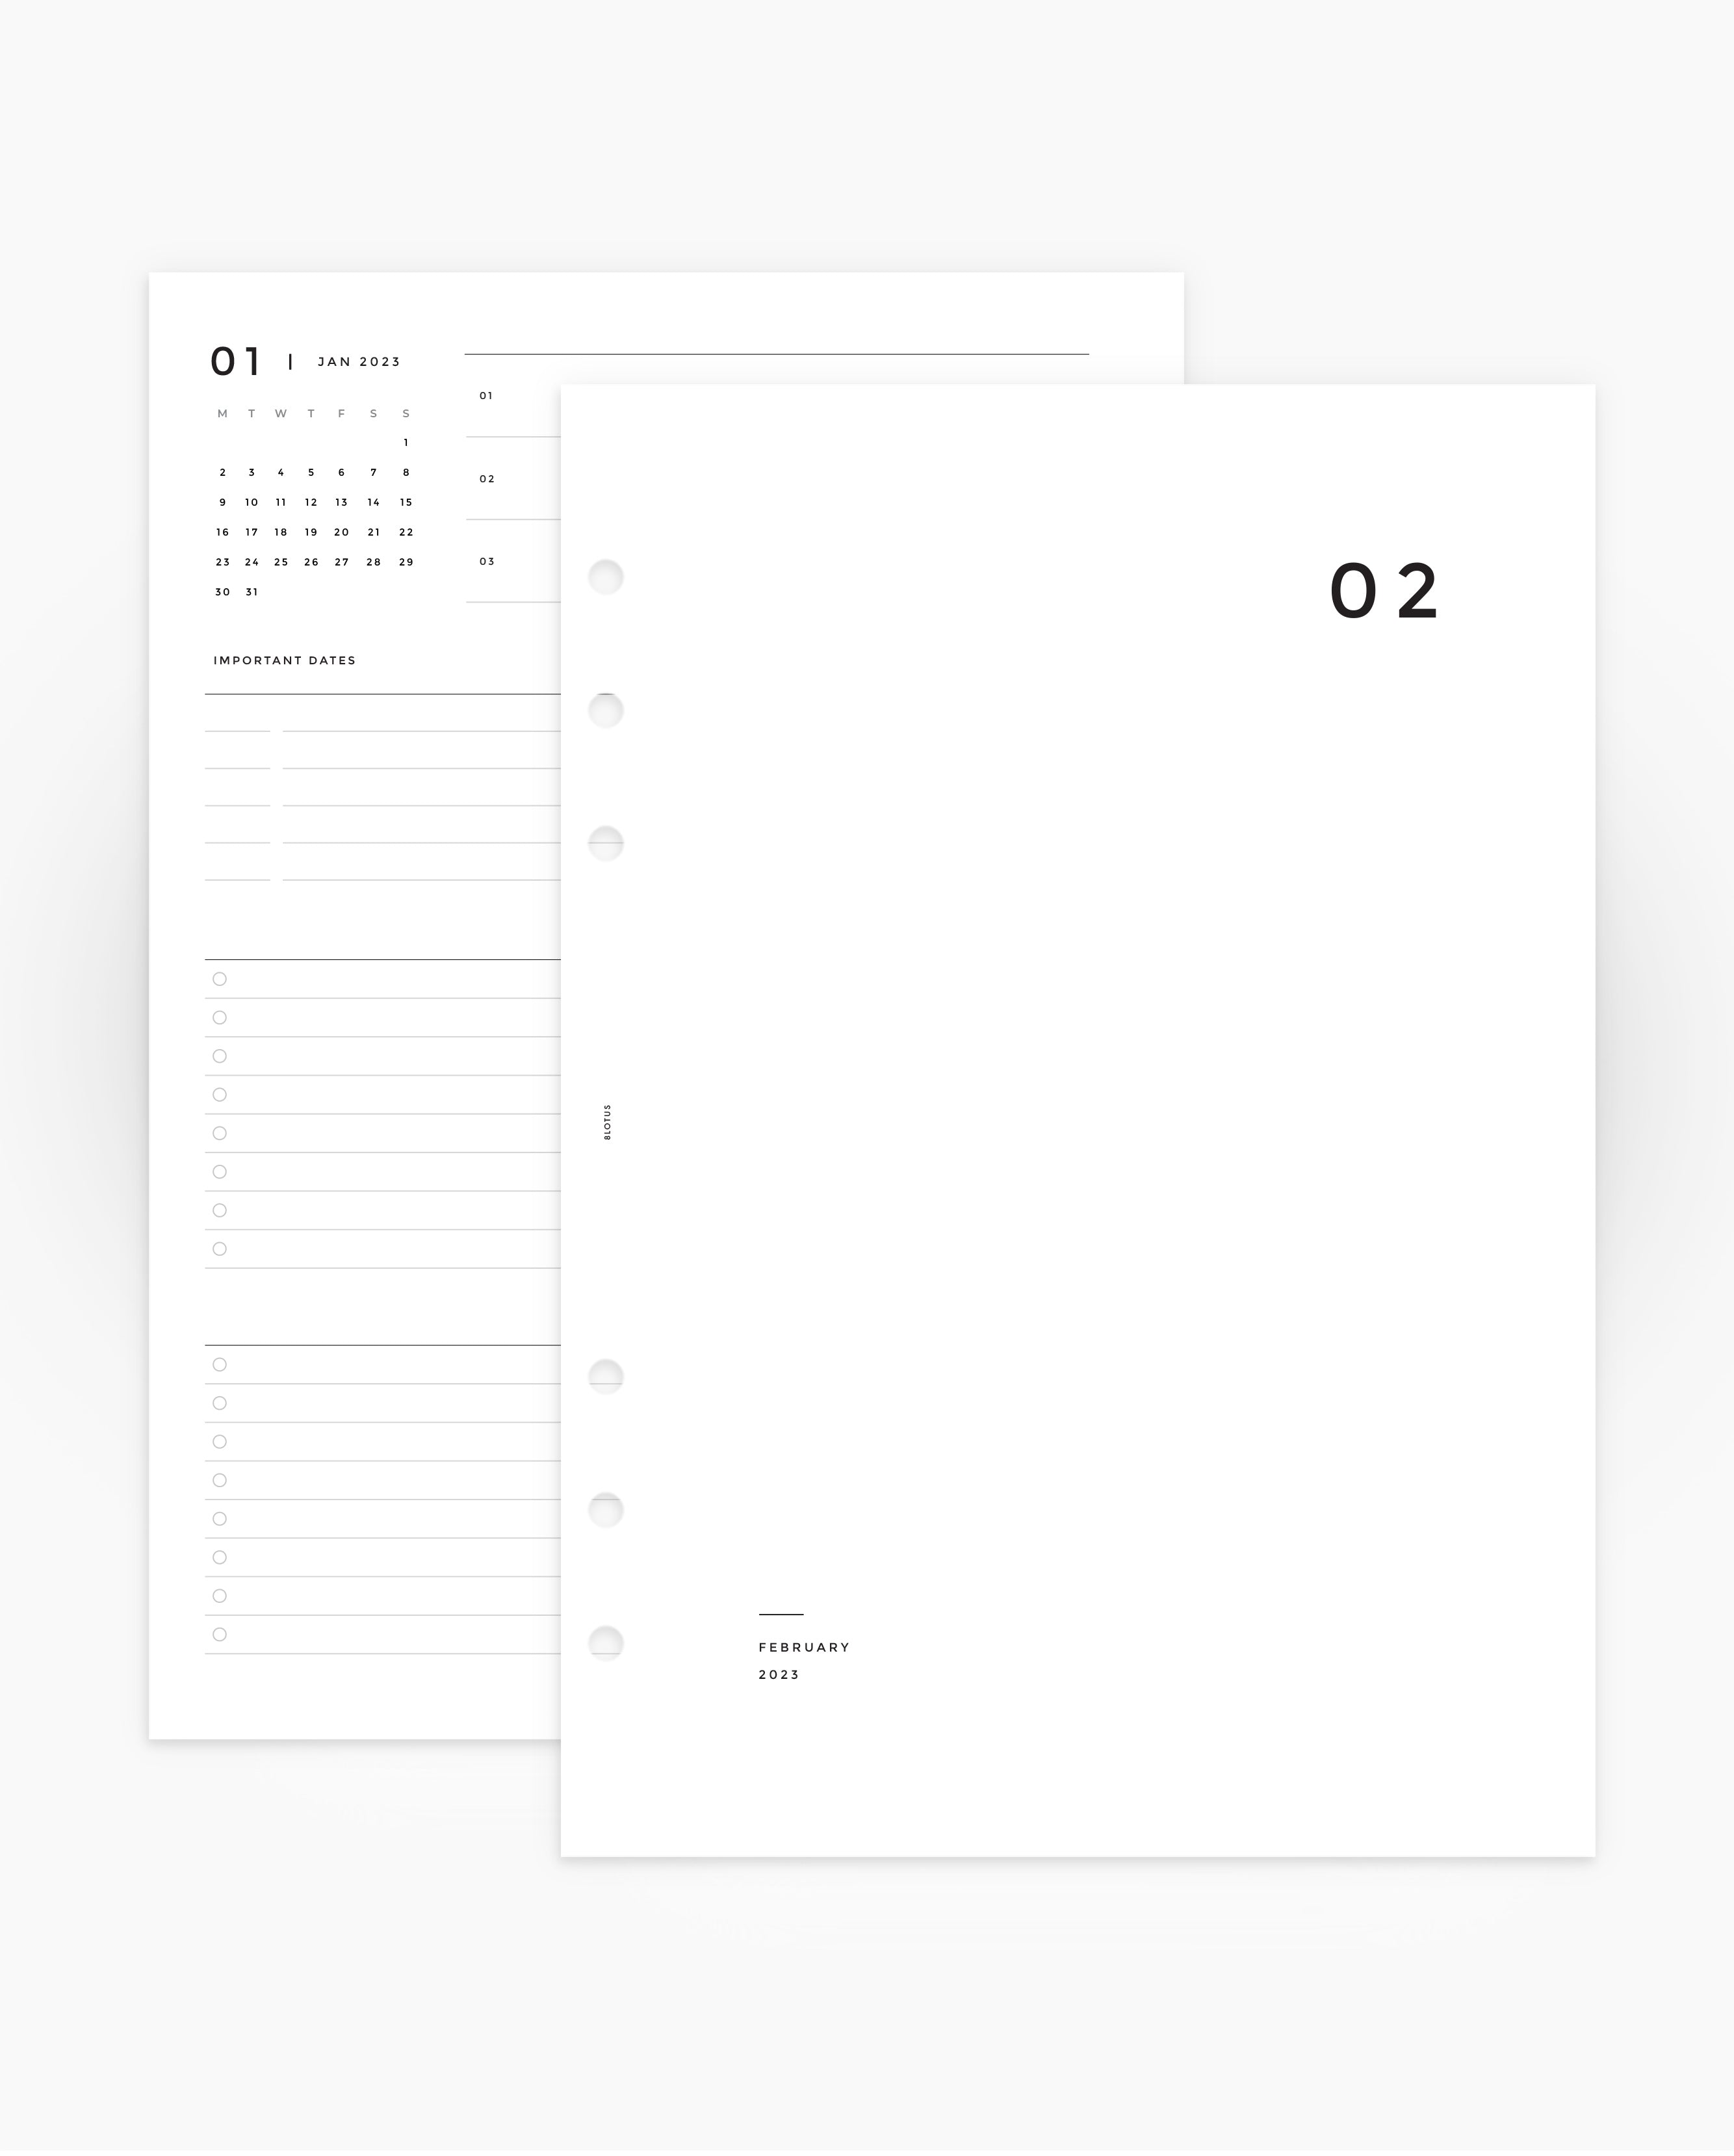 MN016L - 2023 MONTHLY PLANNER Lined - MO4P - PDF